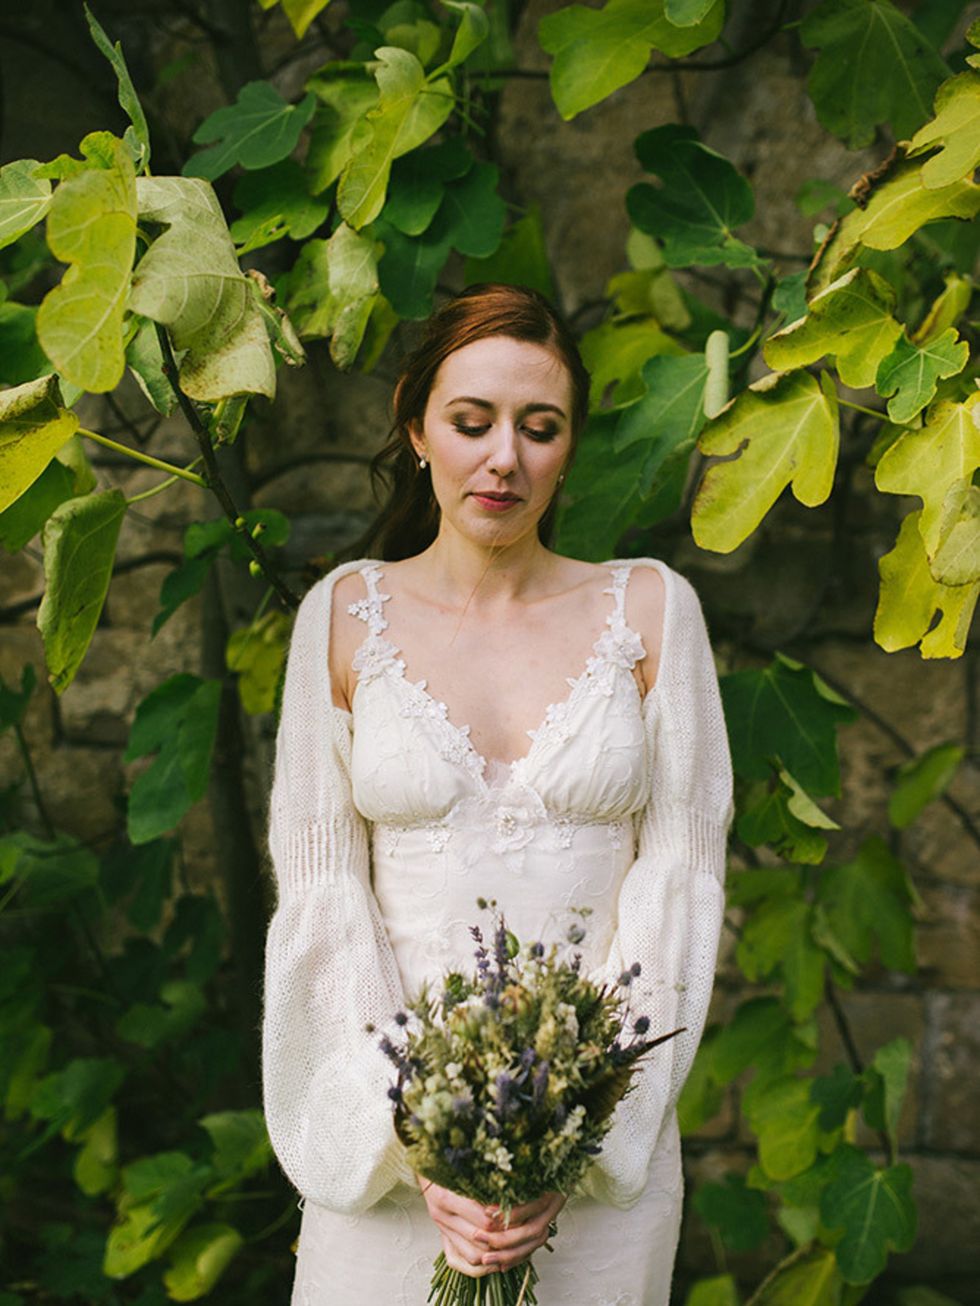 <p>My wedding dress was the 'Constance' by <a href="http://www.clairepettibone.com/" target="_blank">Claire Pettibone</a>. As soon as I started looking for dresses, I was immediately drawn to her boho and nature-inspired designs.</p>

<p>When I saw the 'C